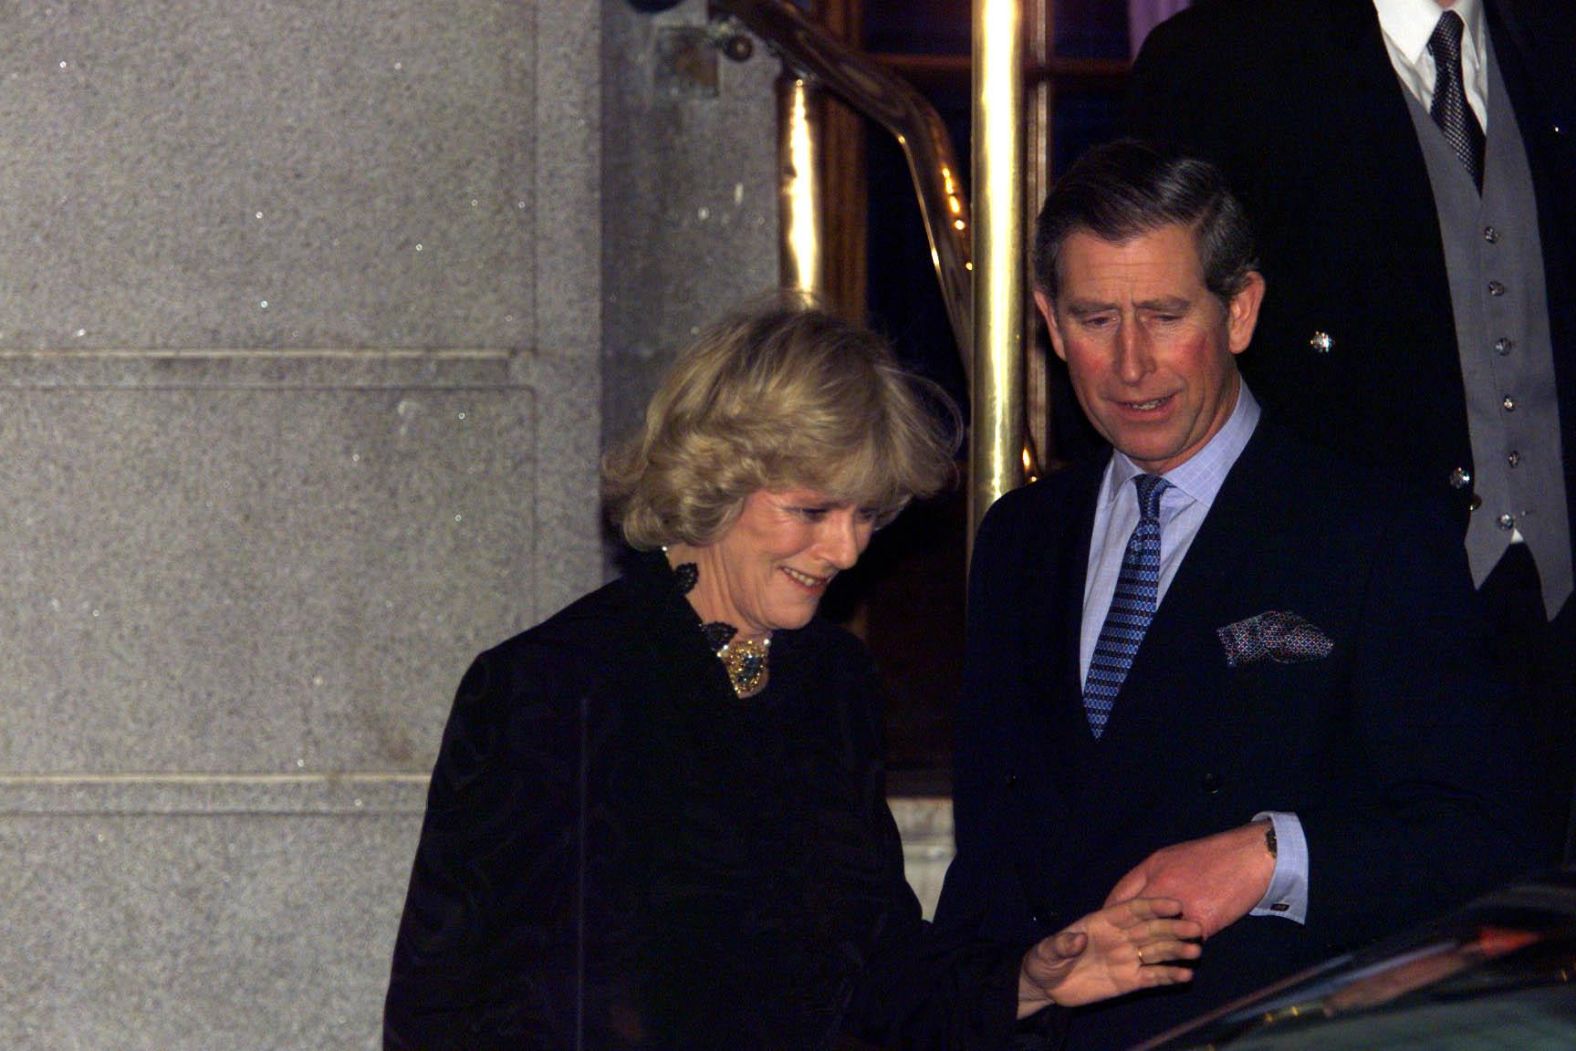 Charles and Camilla make their first public appearance as a couple after leaving a party in London in January 1999.